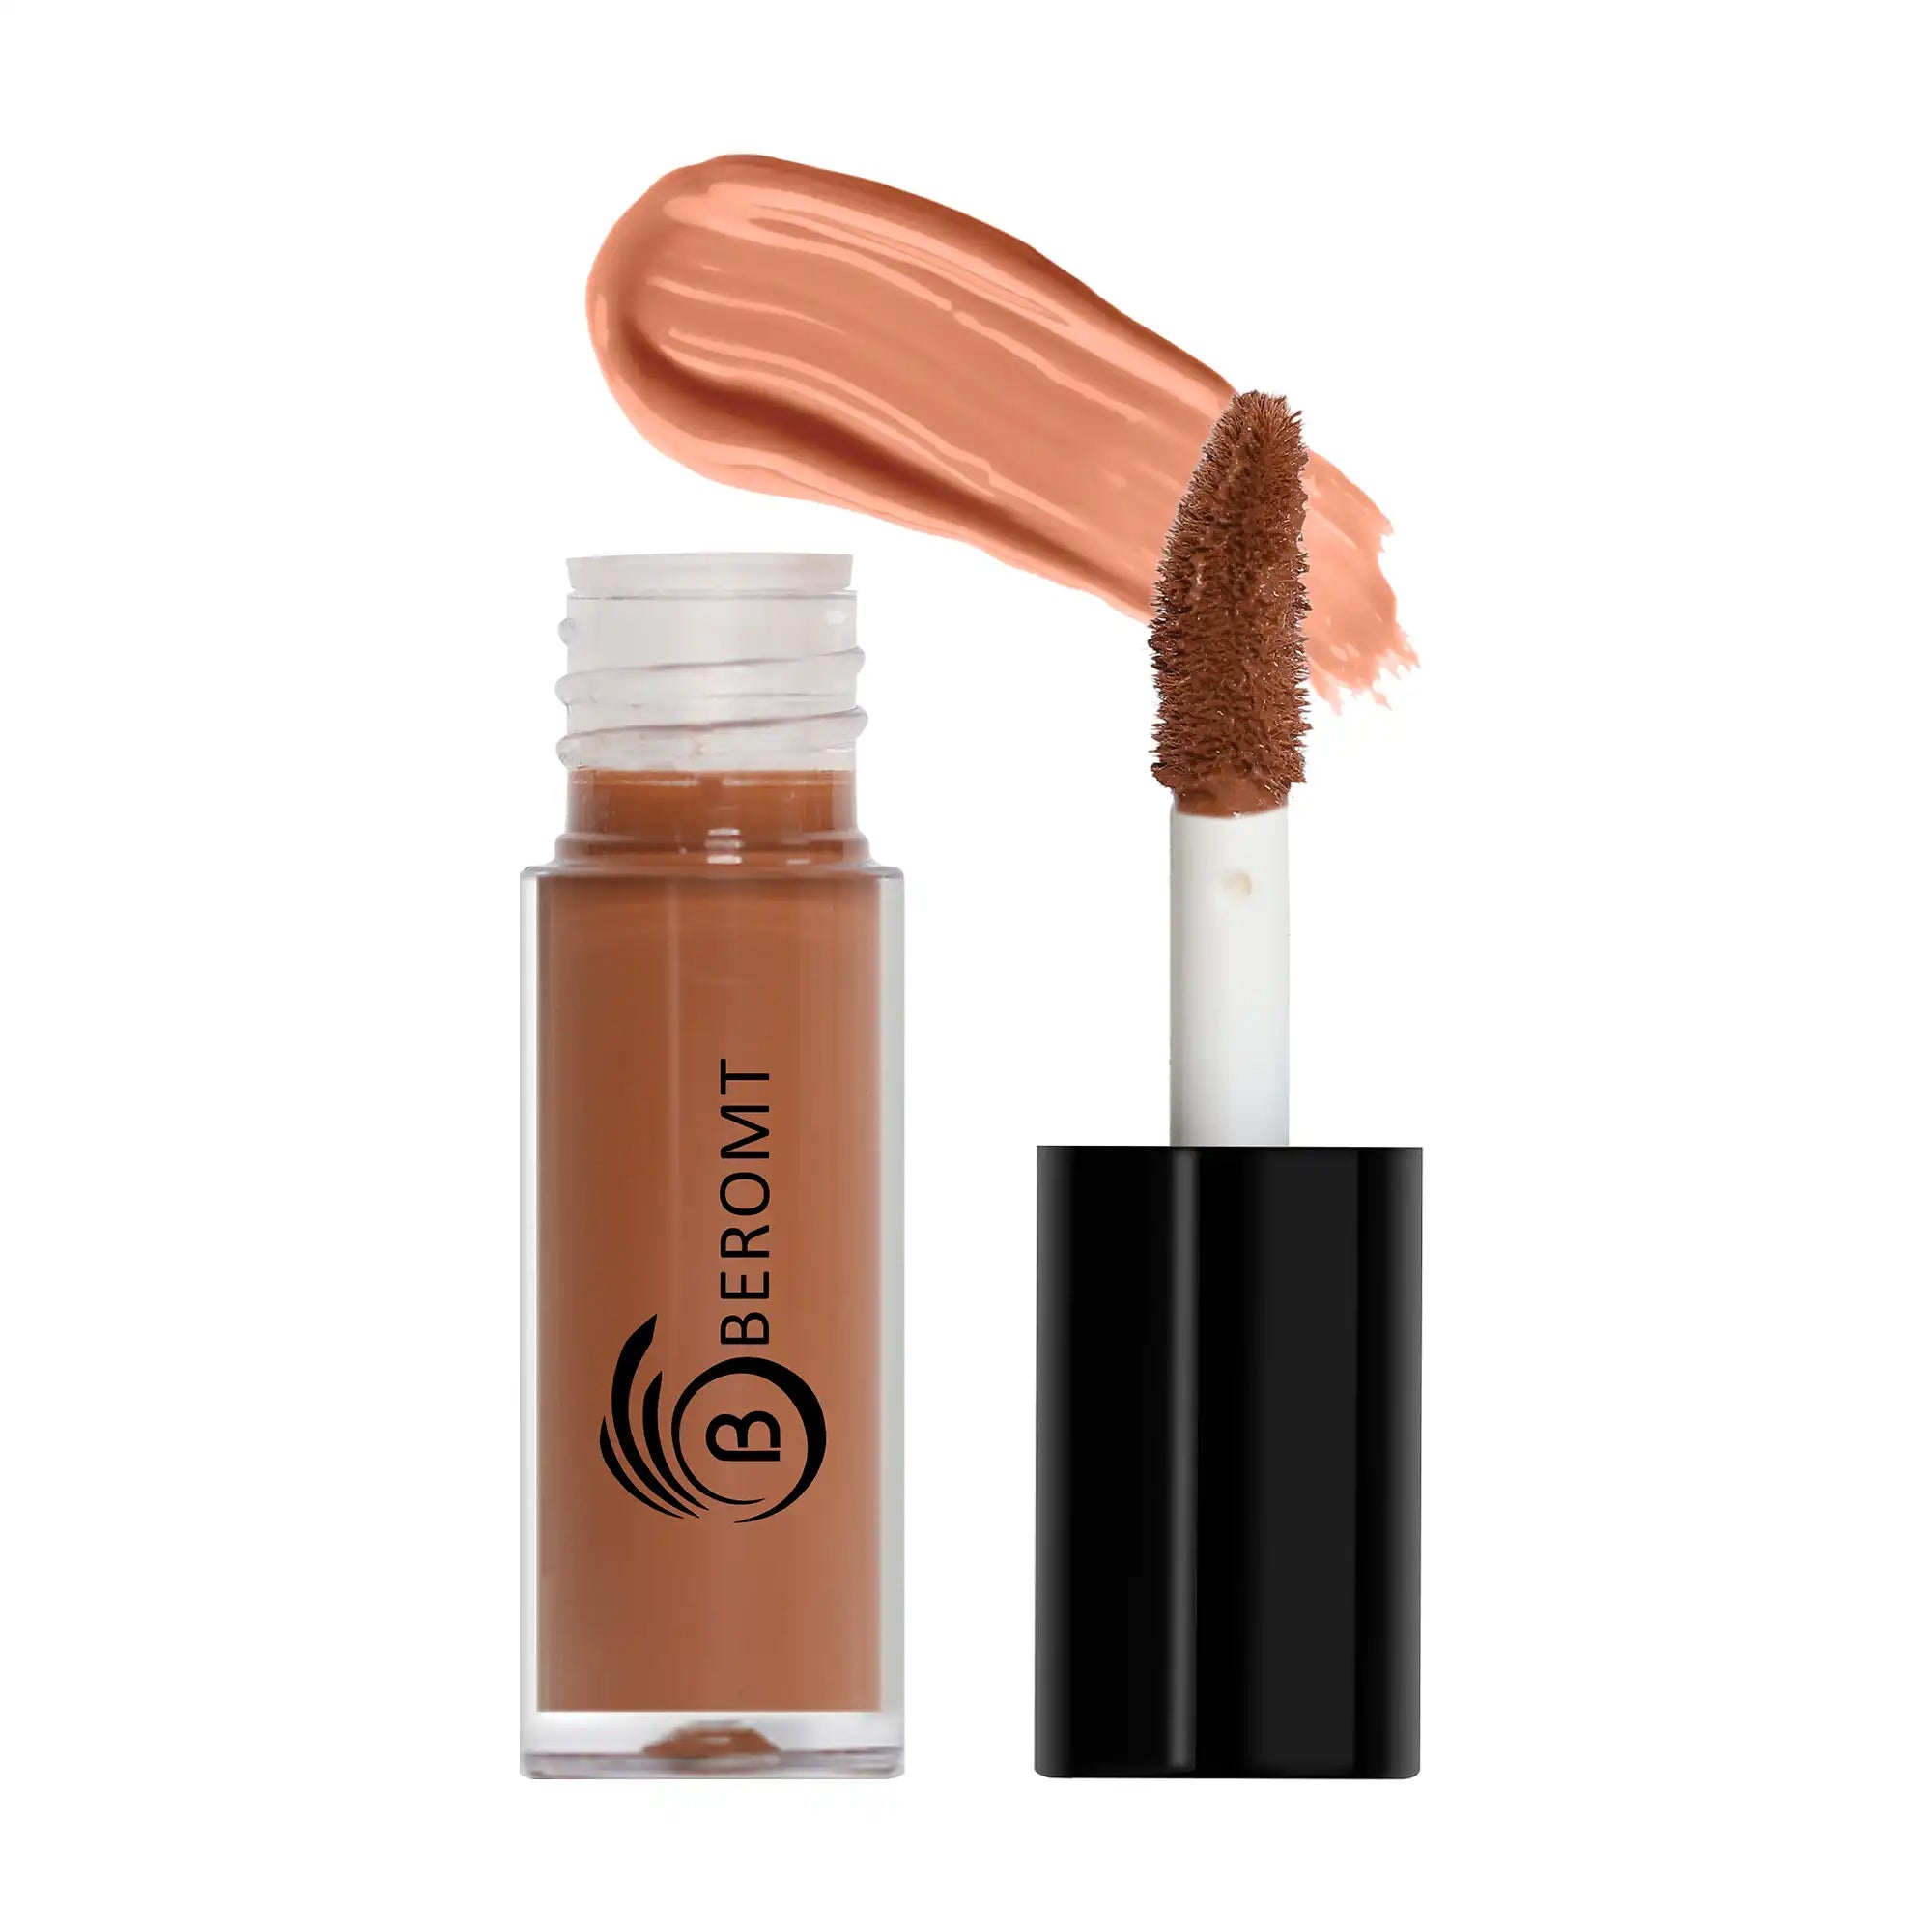 Beromt lip gloss bottle with swatch -  Spicy Lips